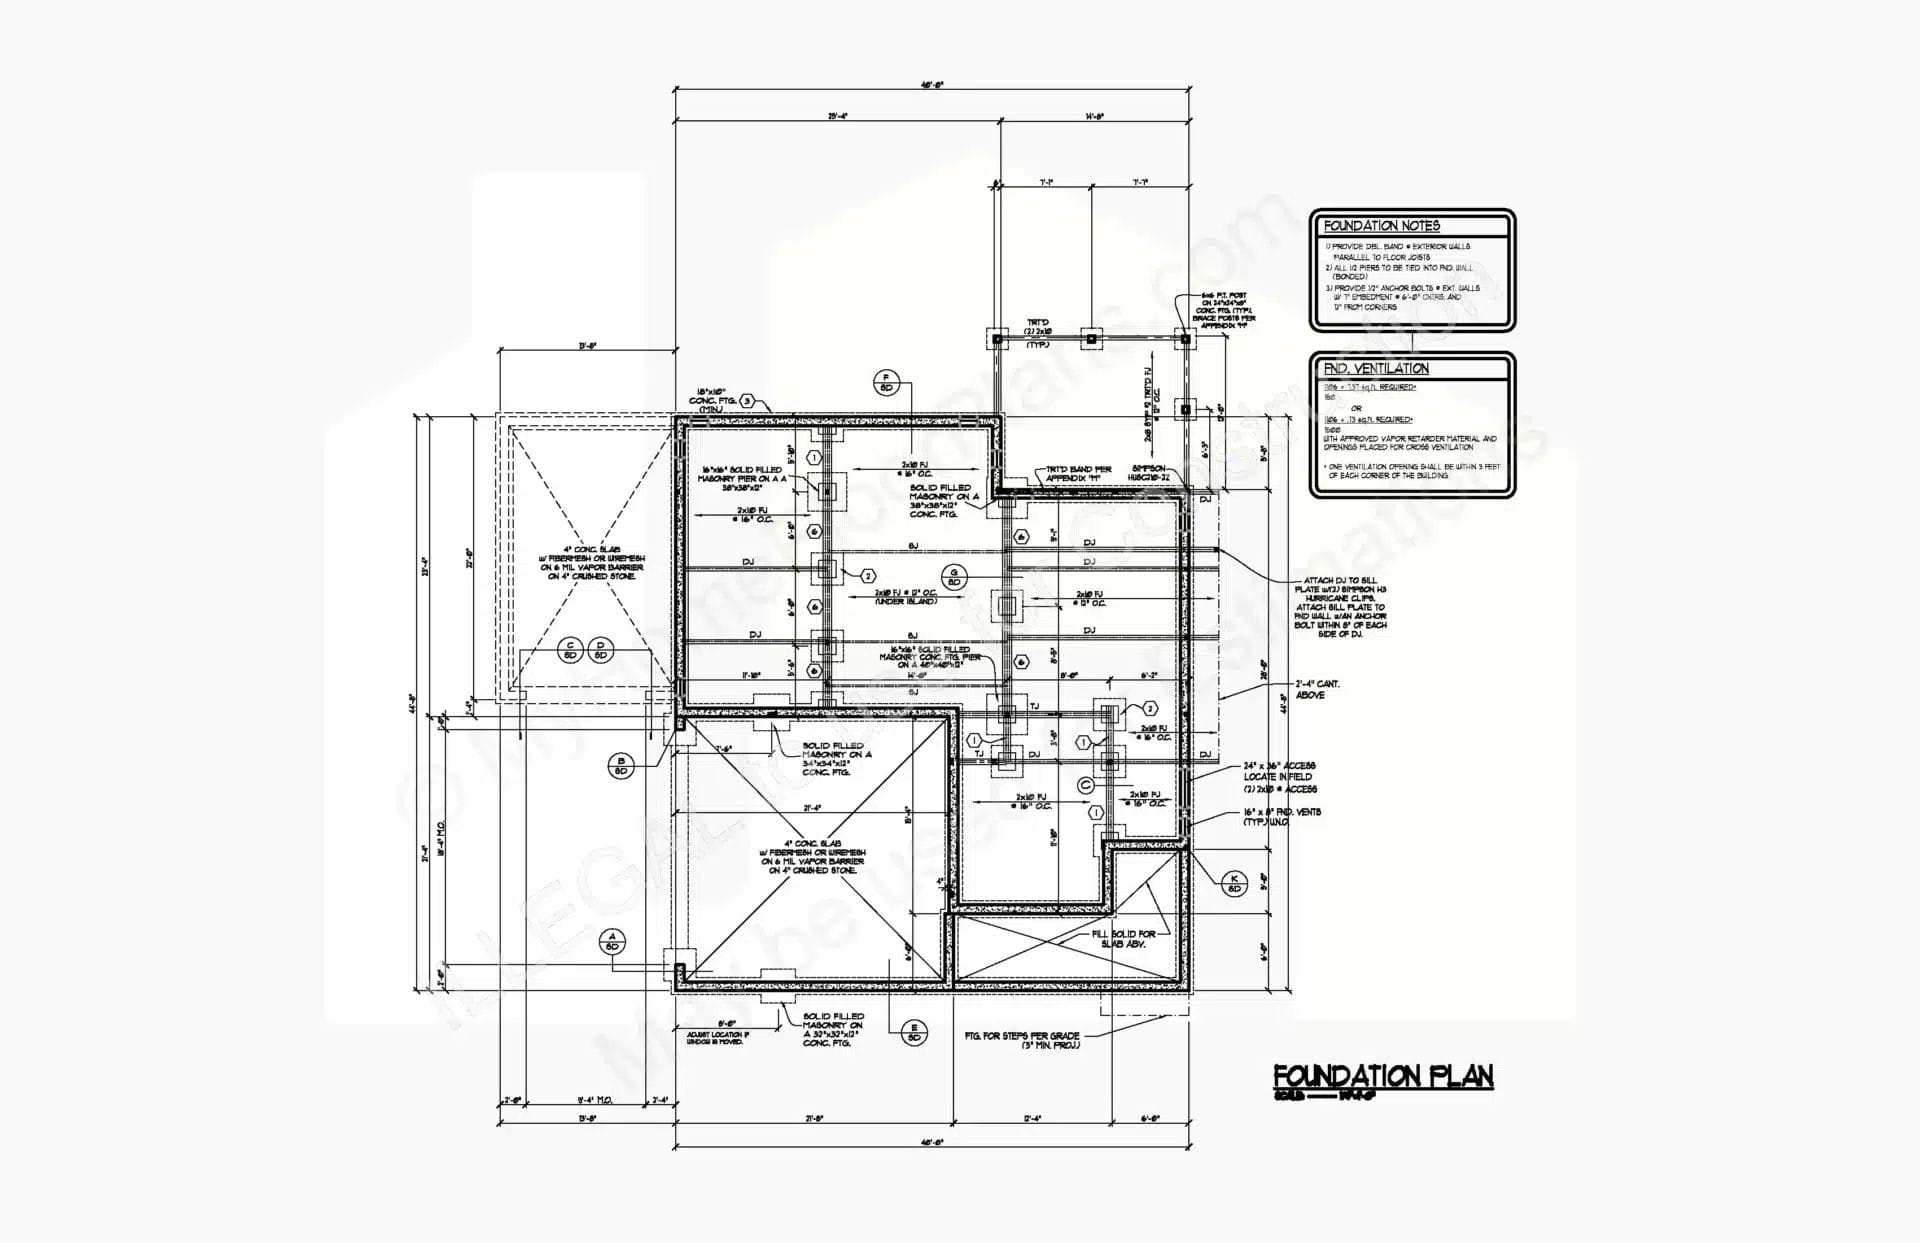 Detailed architectural foundation design with labeled dimensions, structural elements like walls and beams, and specific notes detailing construction standards. The layout includes multiple rooms and annotations for building guidelines. 13-1790